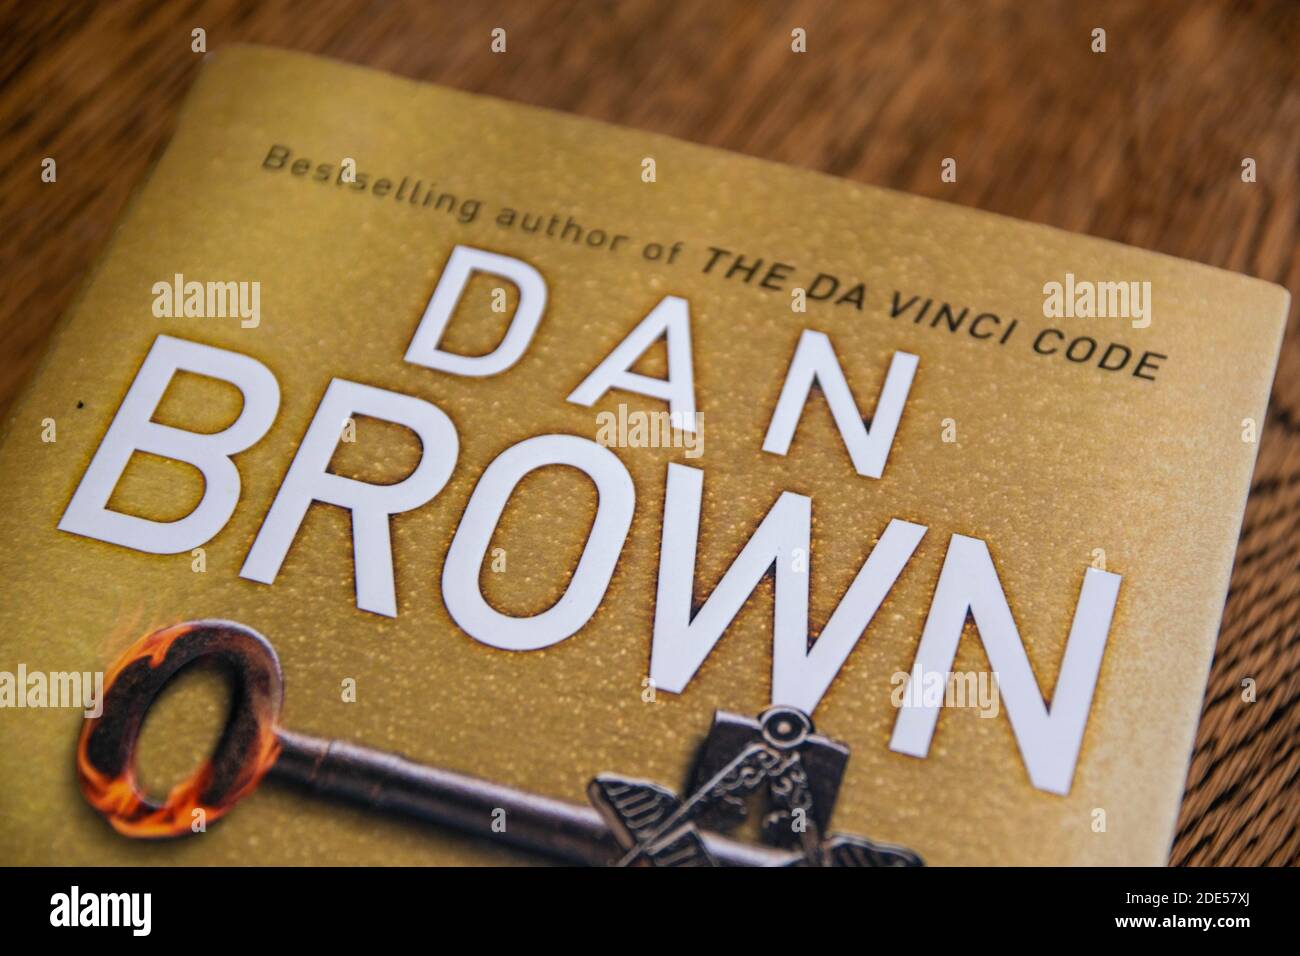 Dan Brown is an American author best known for his thriller Robert Langdon novels Angels & Demons, The Da Vinci Code, The Lost Symbol, Inferno Stock Photo